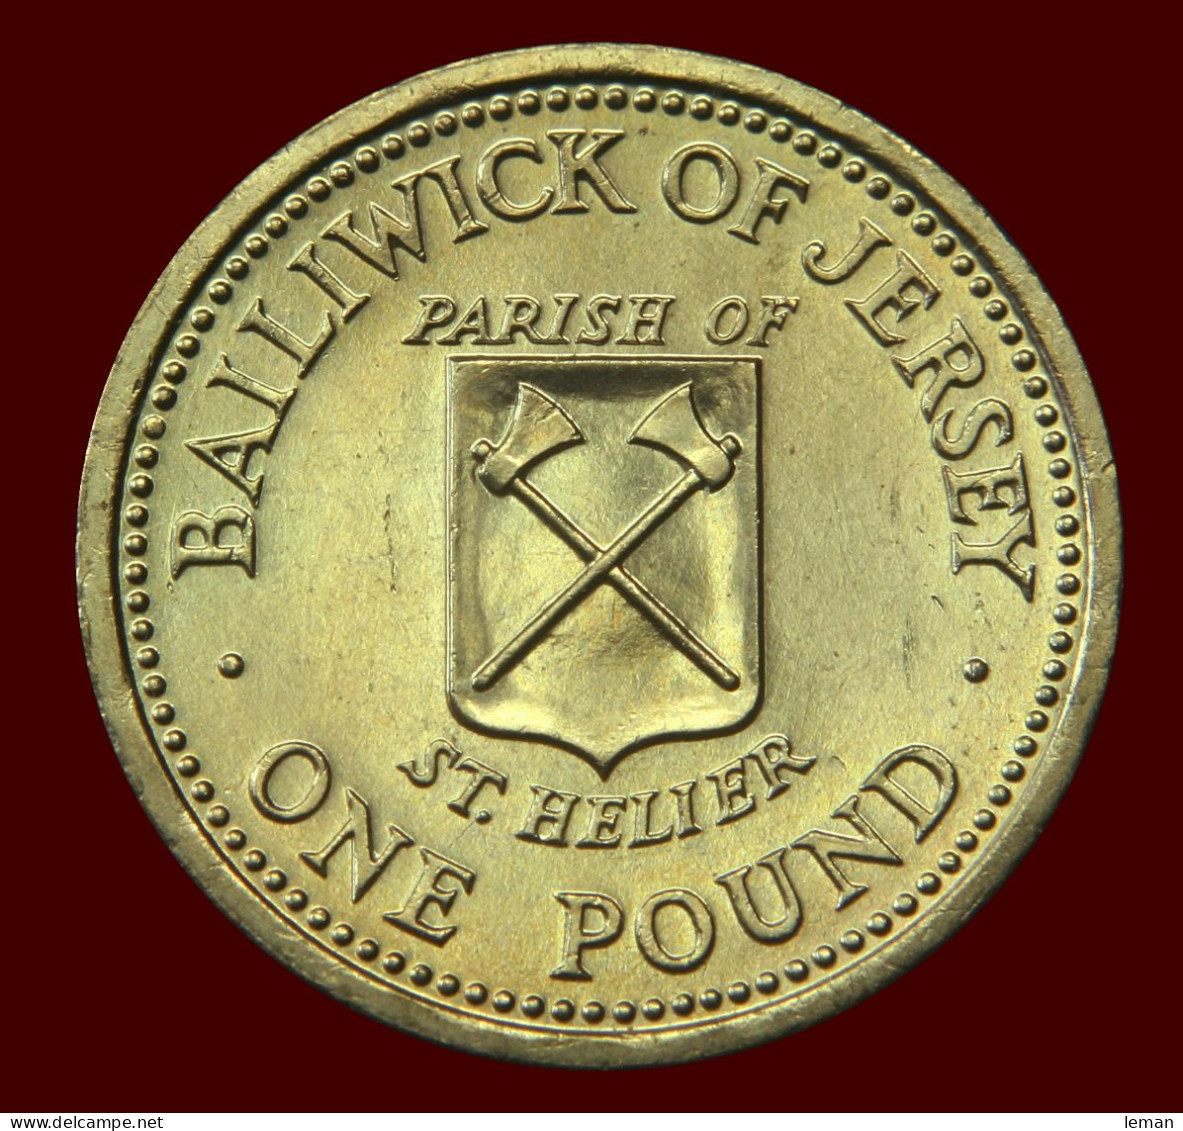 Jersey Pound 1983 Virtually UNC Parish Of St Helier  £1 - Iles Anglo-normandes